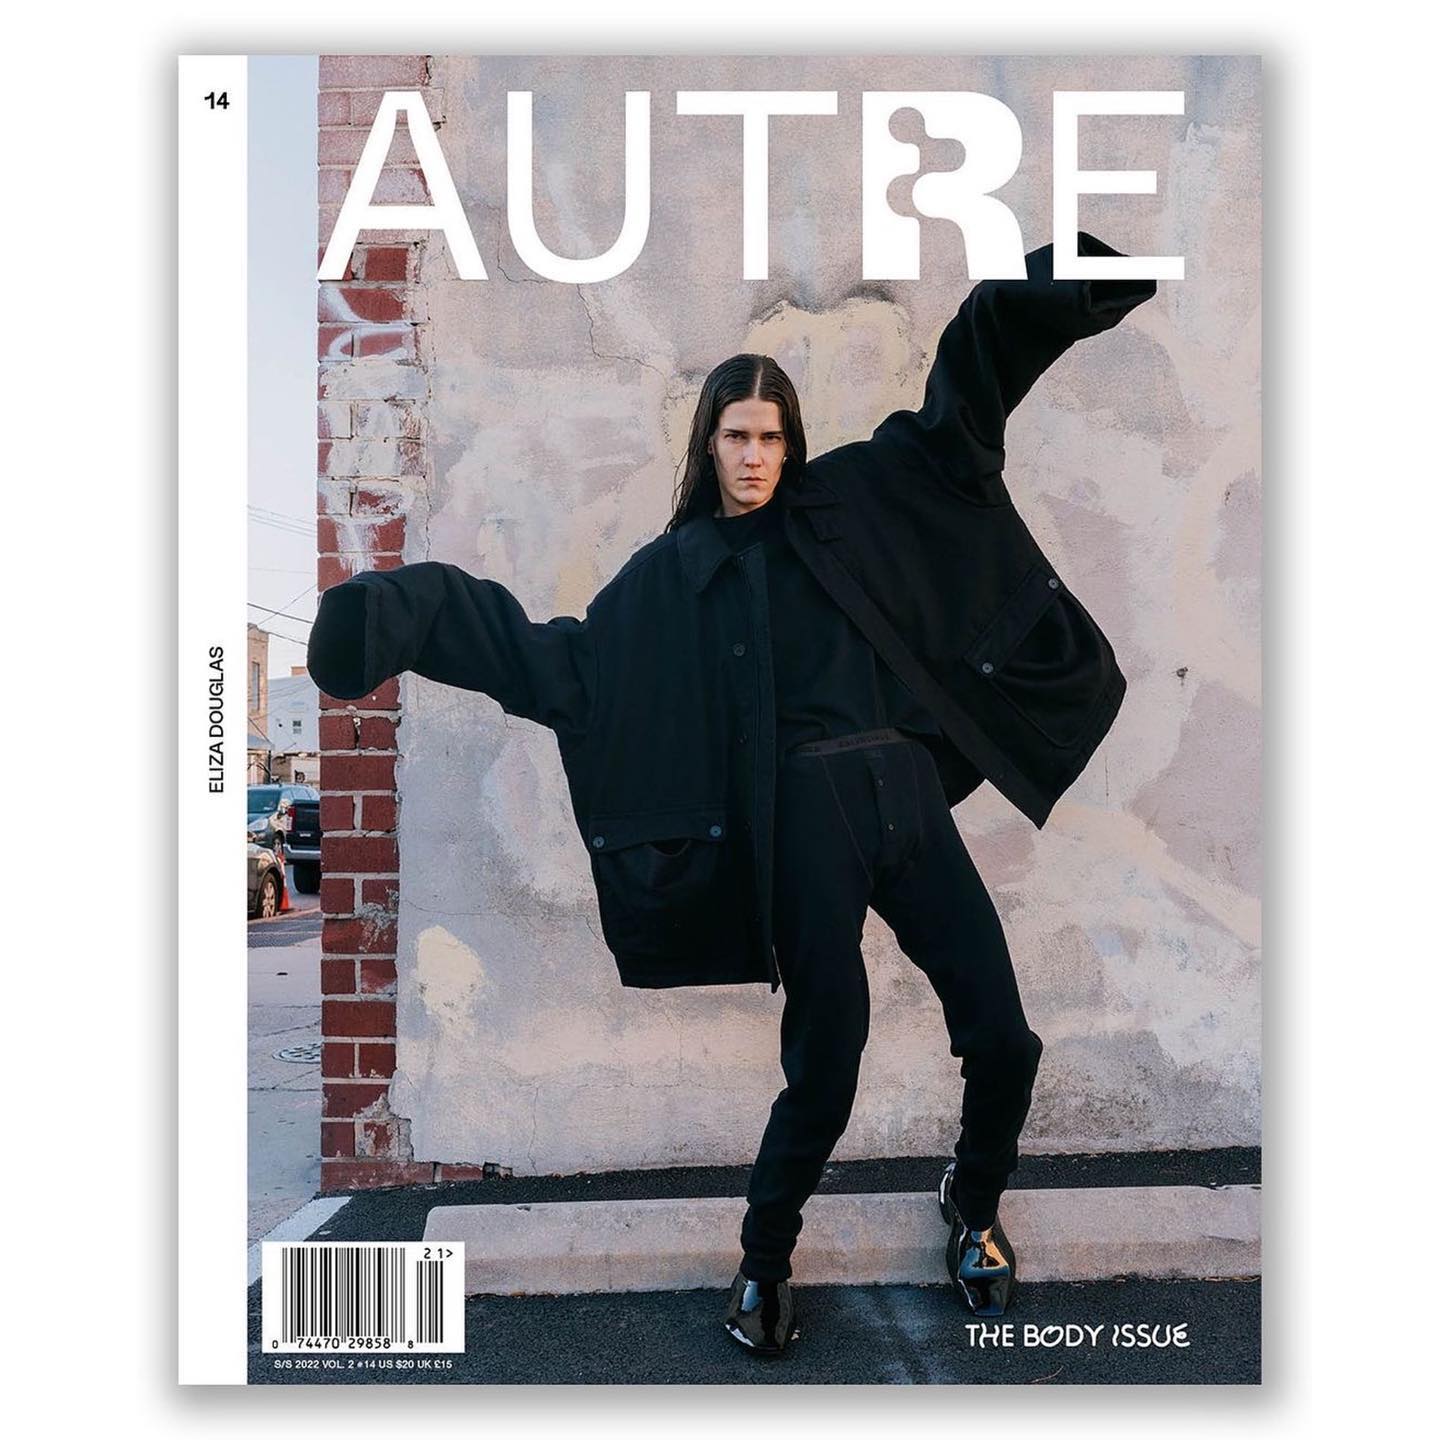 Eliza (@elizad0uglas ) on the cover of Autre Magazine wearing Balenciaga. Photography by Jack Pierson, styling by Julie Ragolia, hair by Adam Markarian, make up by Pep Gay.